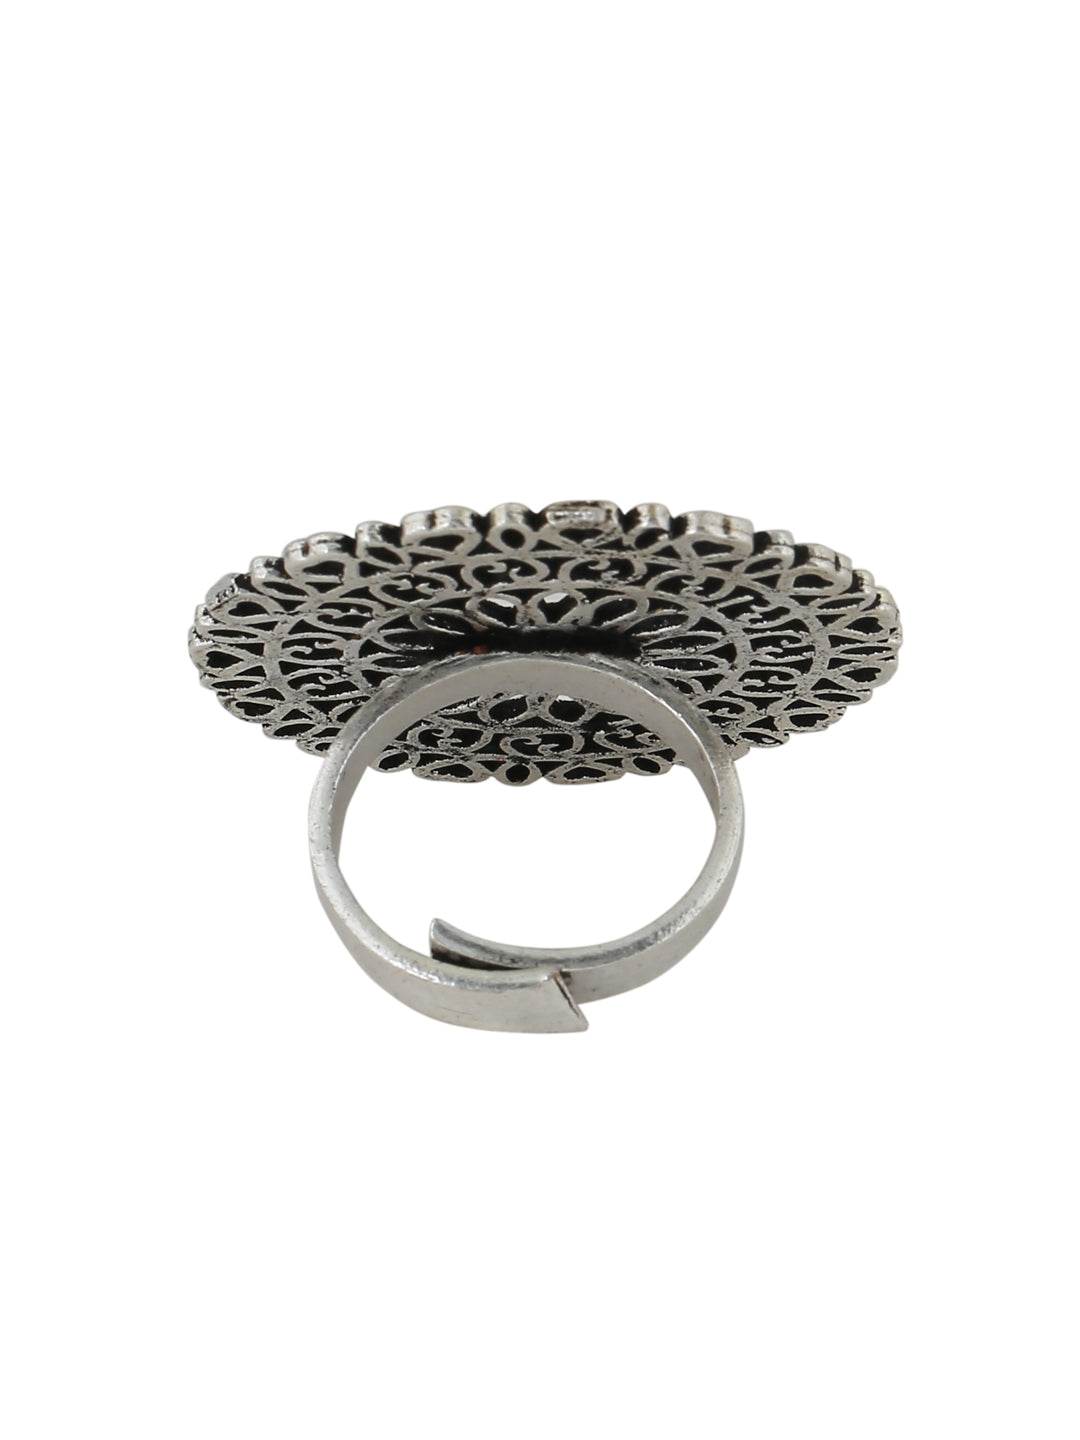 Women's Oxidised Silver-Plated Adjustable Finger Ring - NVR